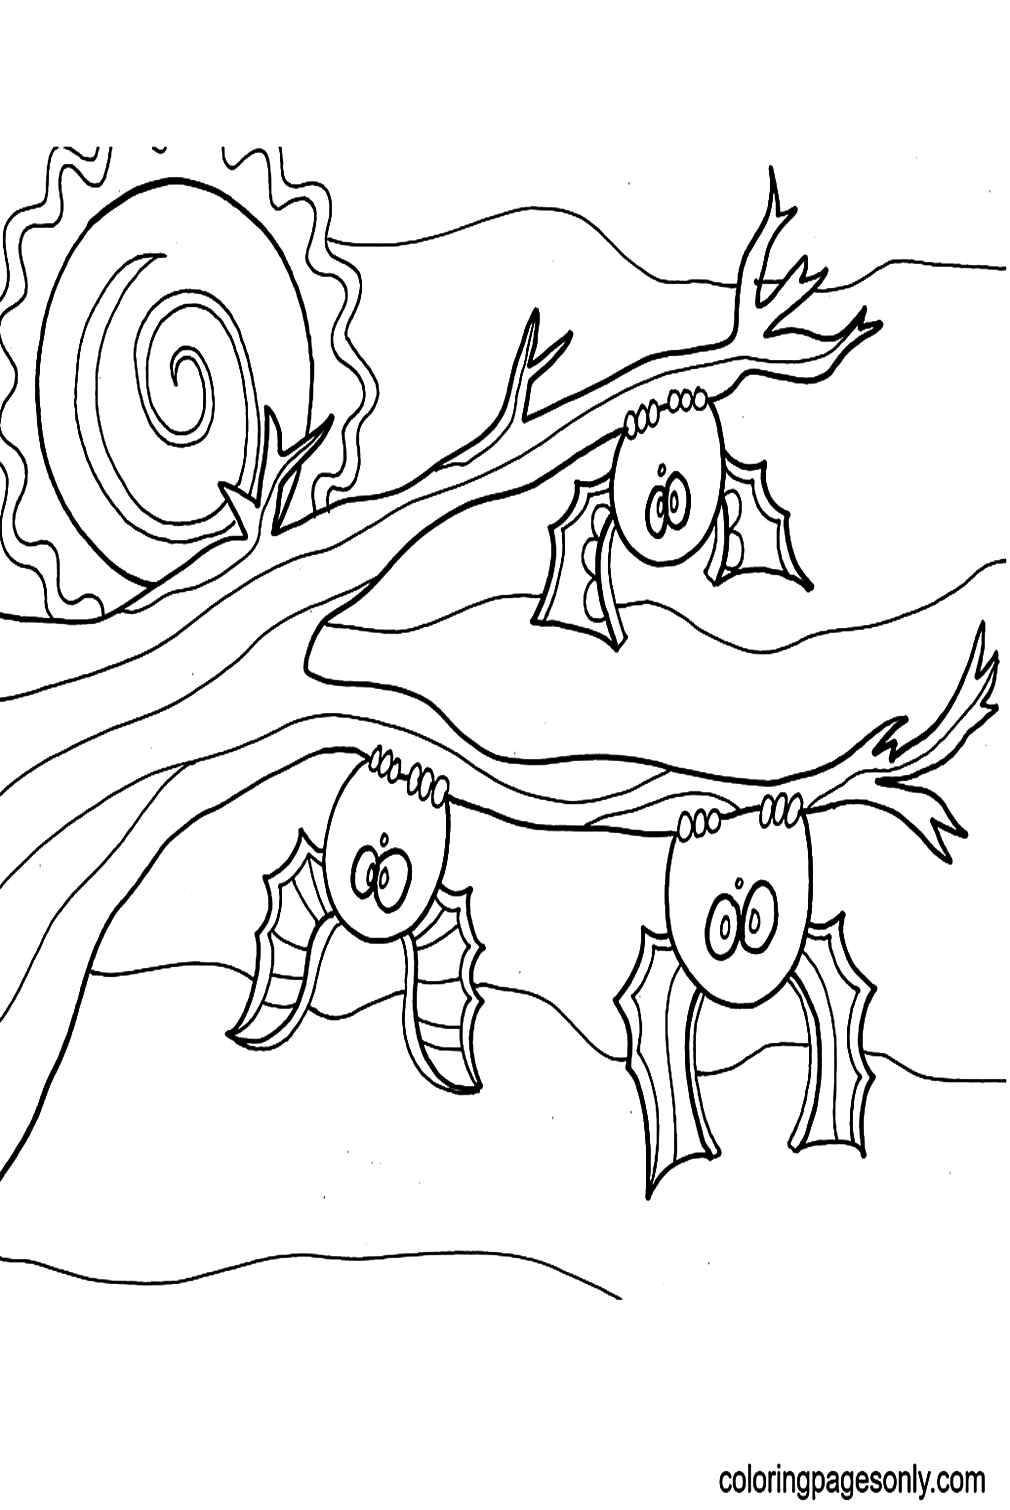 Bats For Halloween Coloring Pages